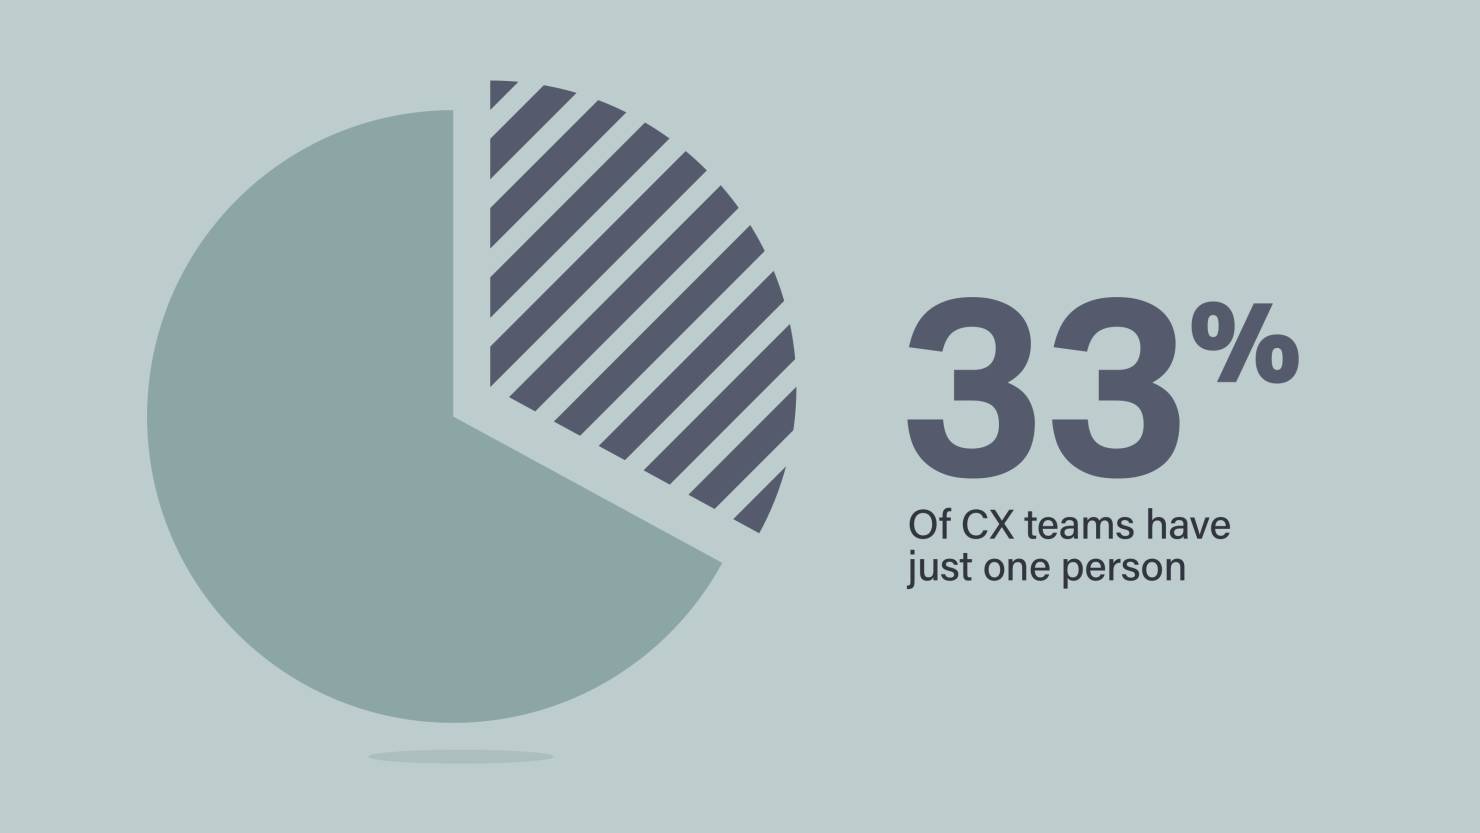 1 in 3 CX teams has just one person